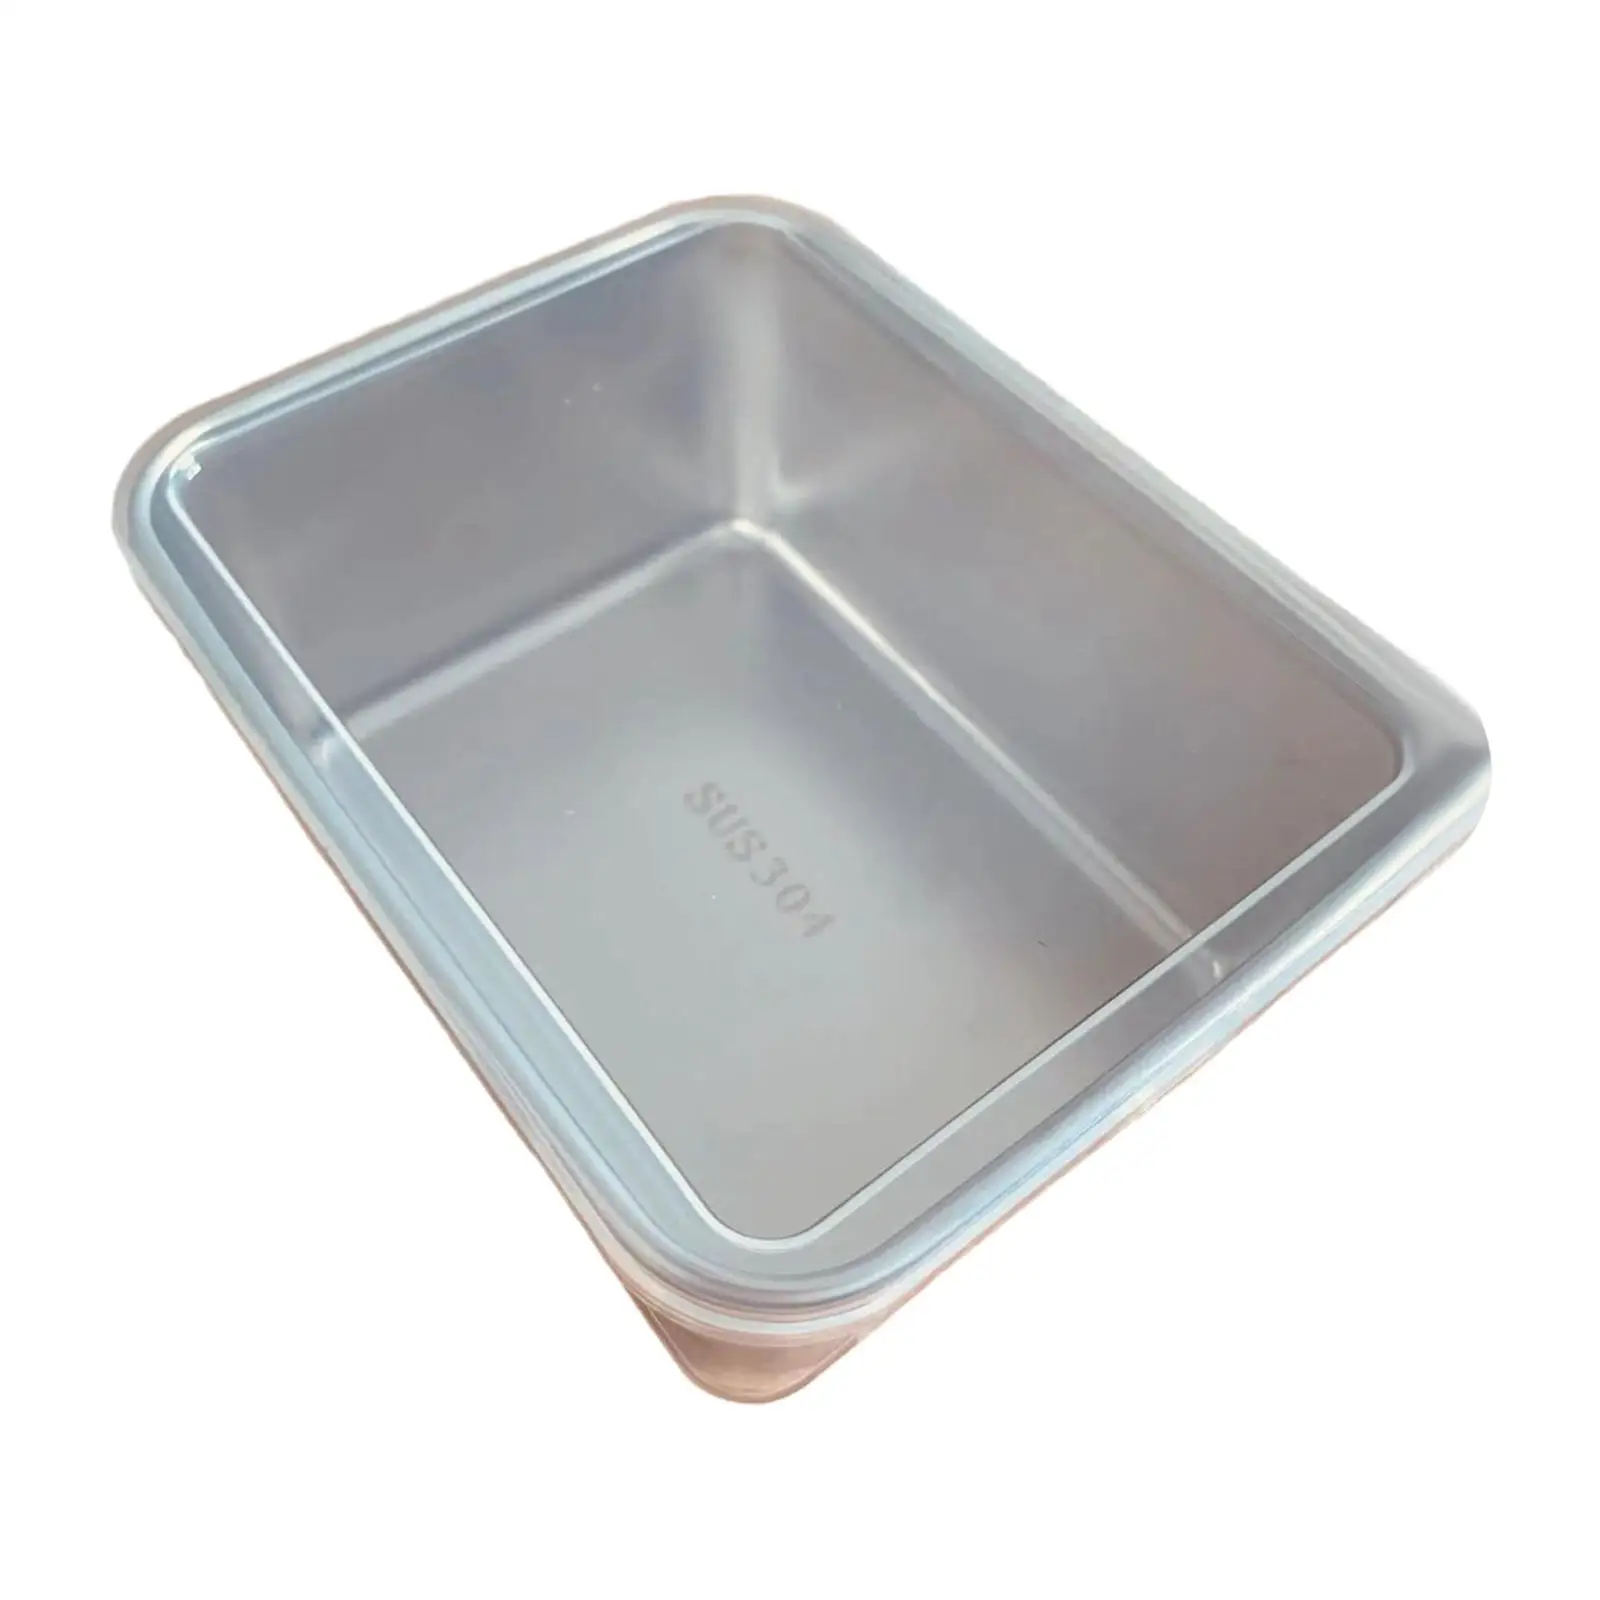 Food Storage Container Stainless Steel Airtight for Office Countertop Pantry